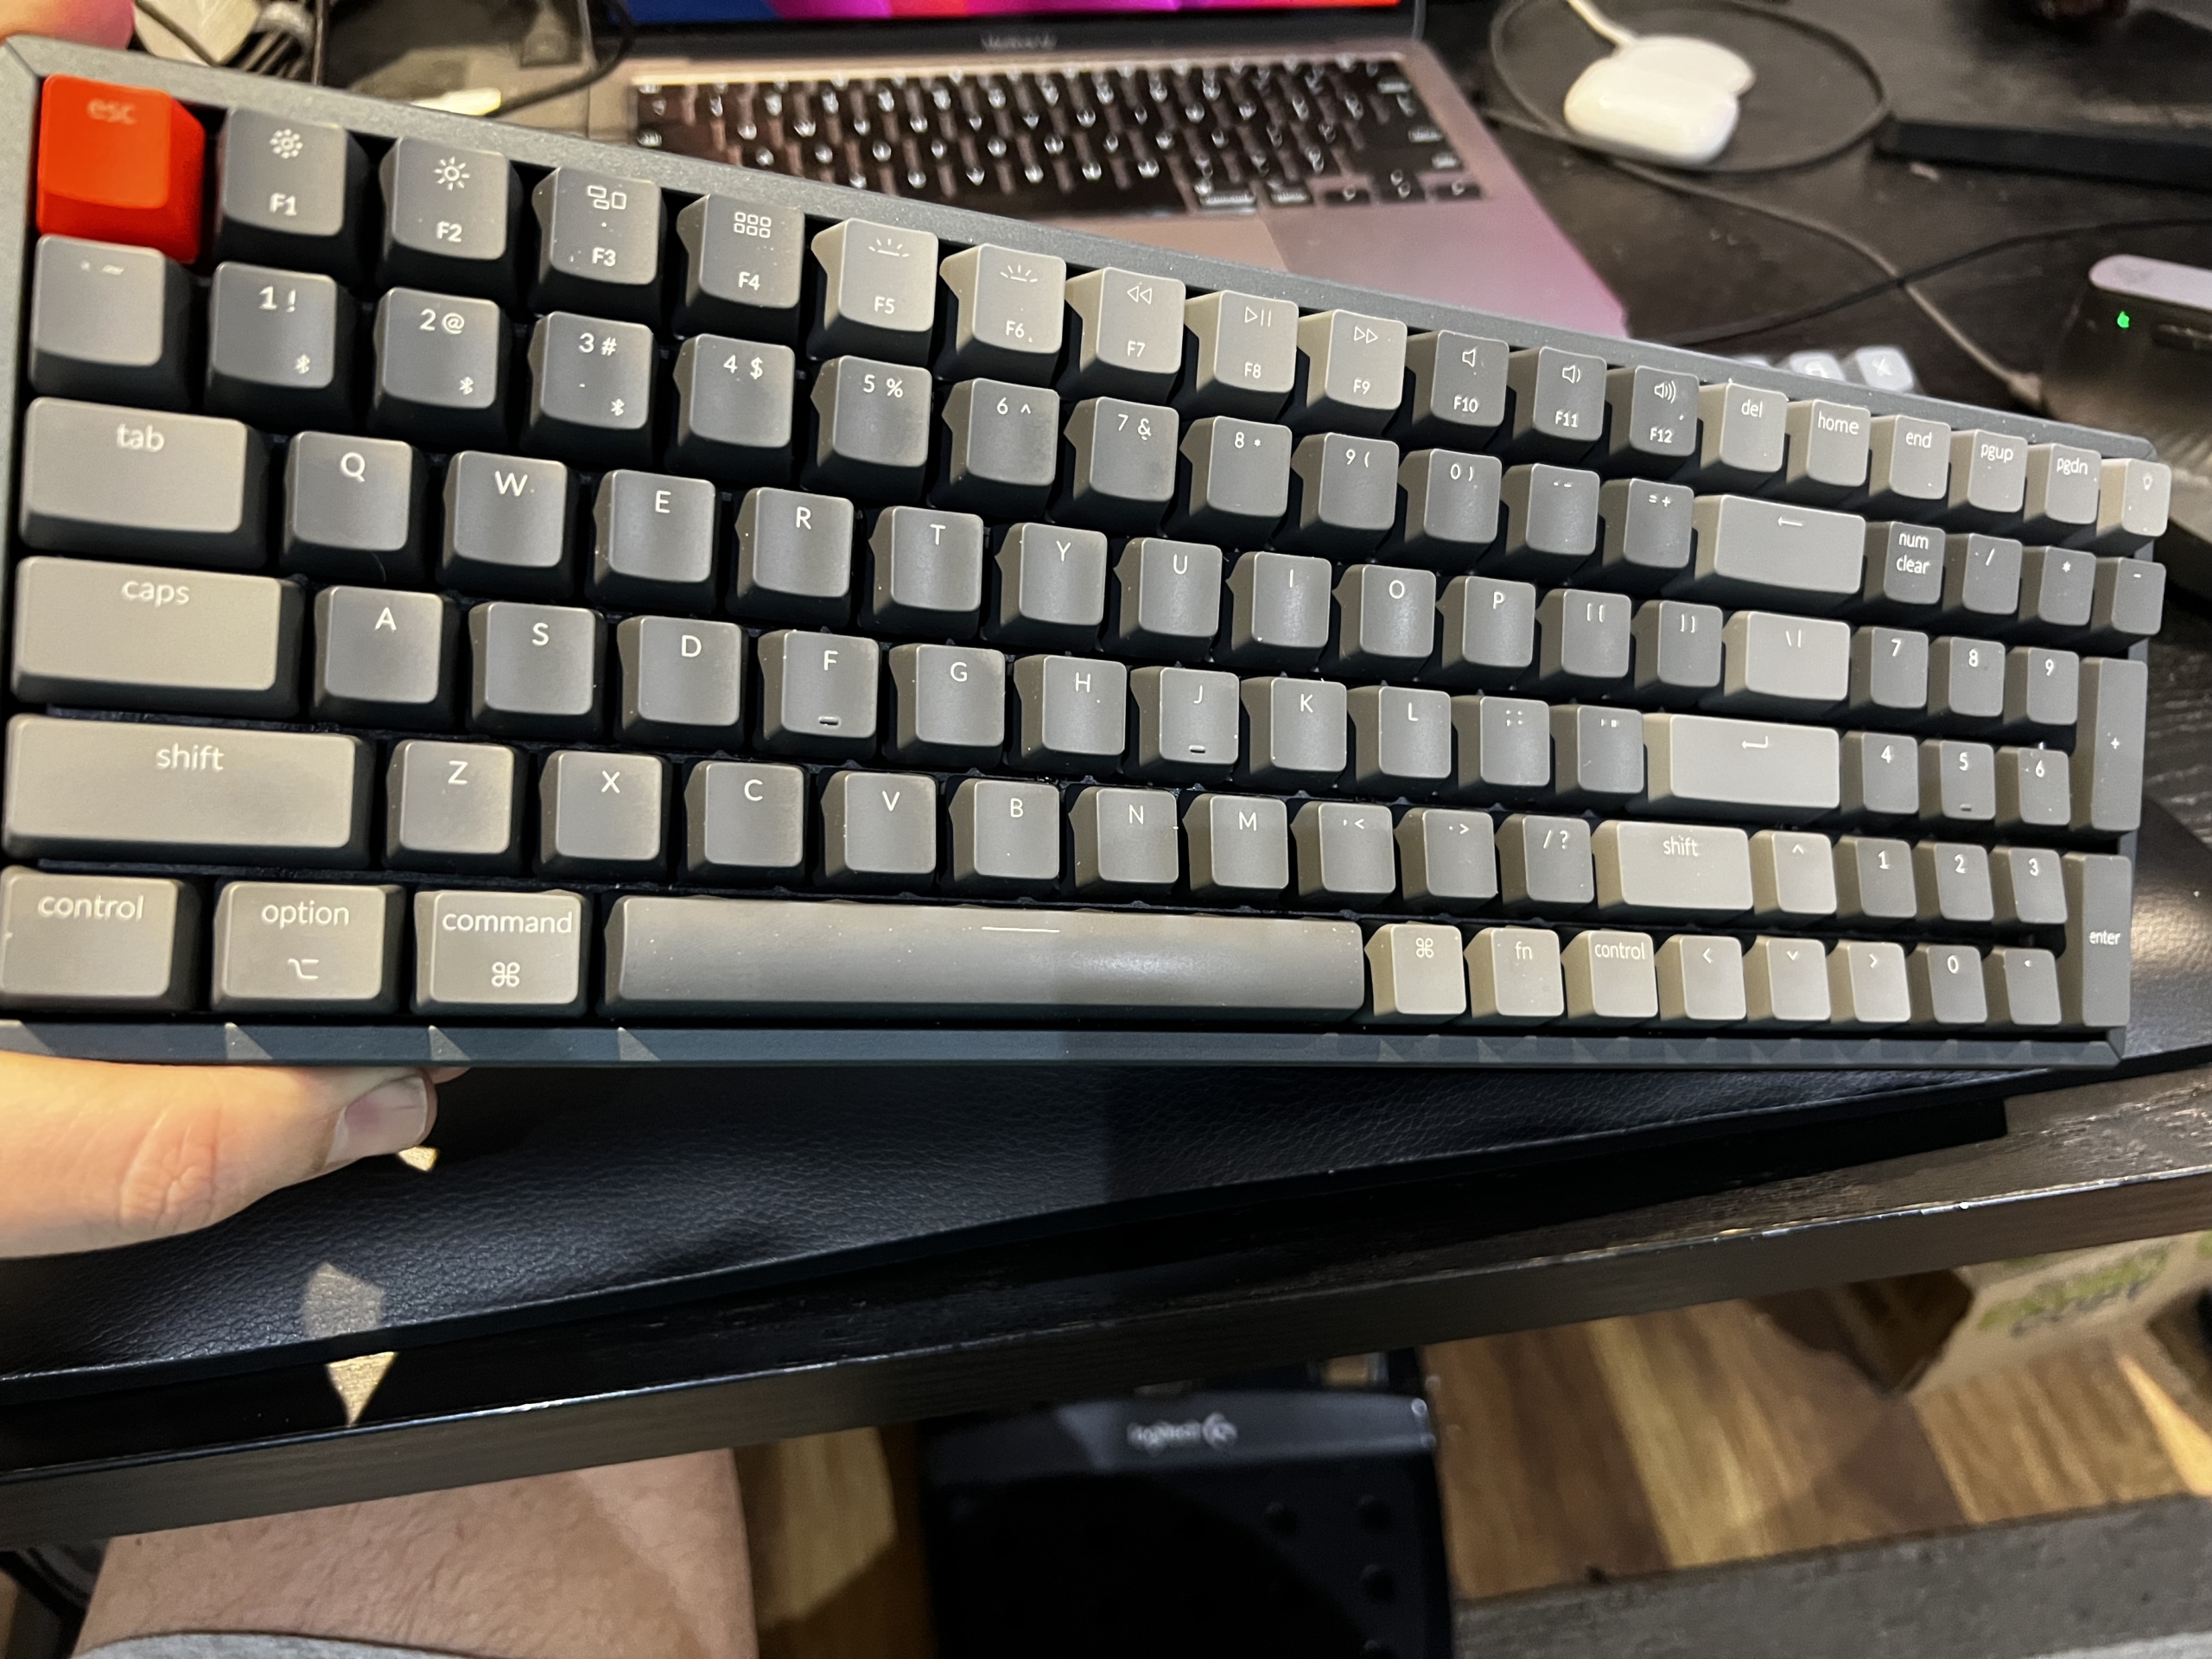 A picture of a Keychron K4 keyboard